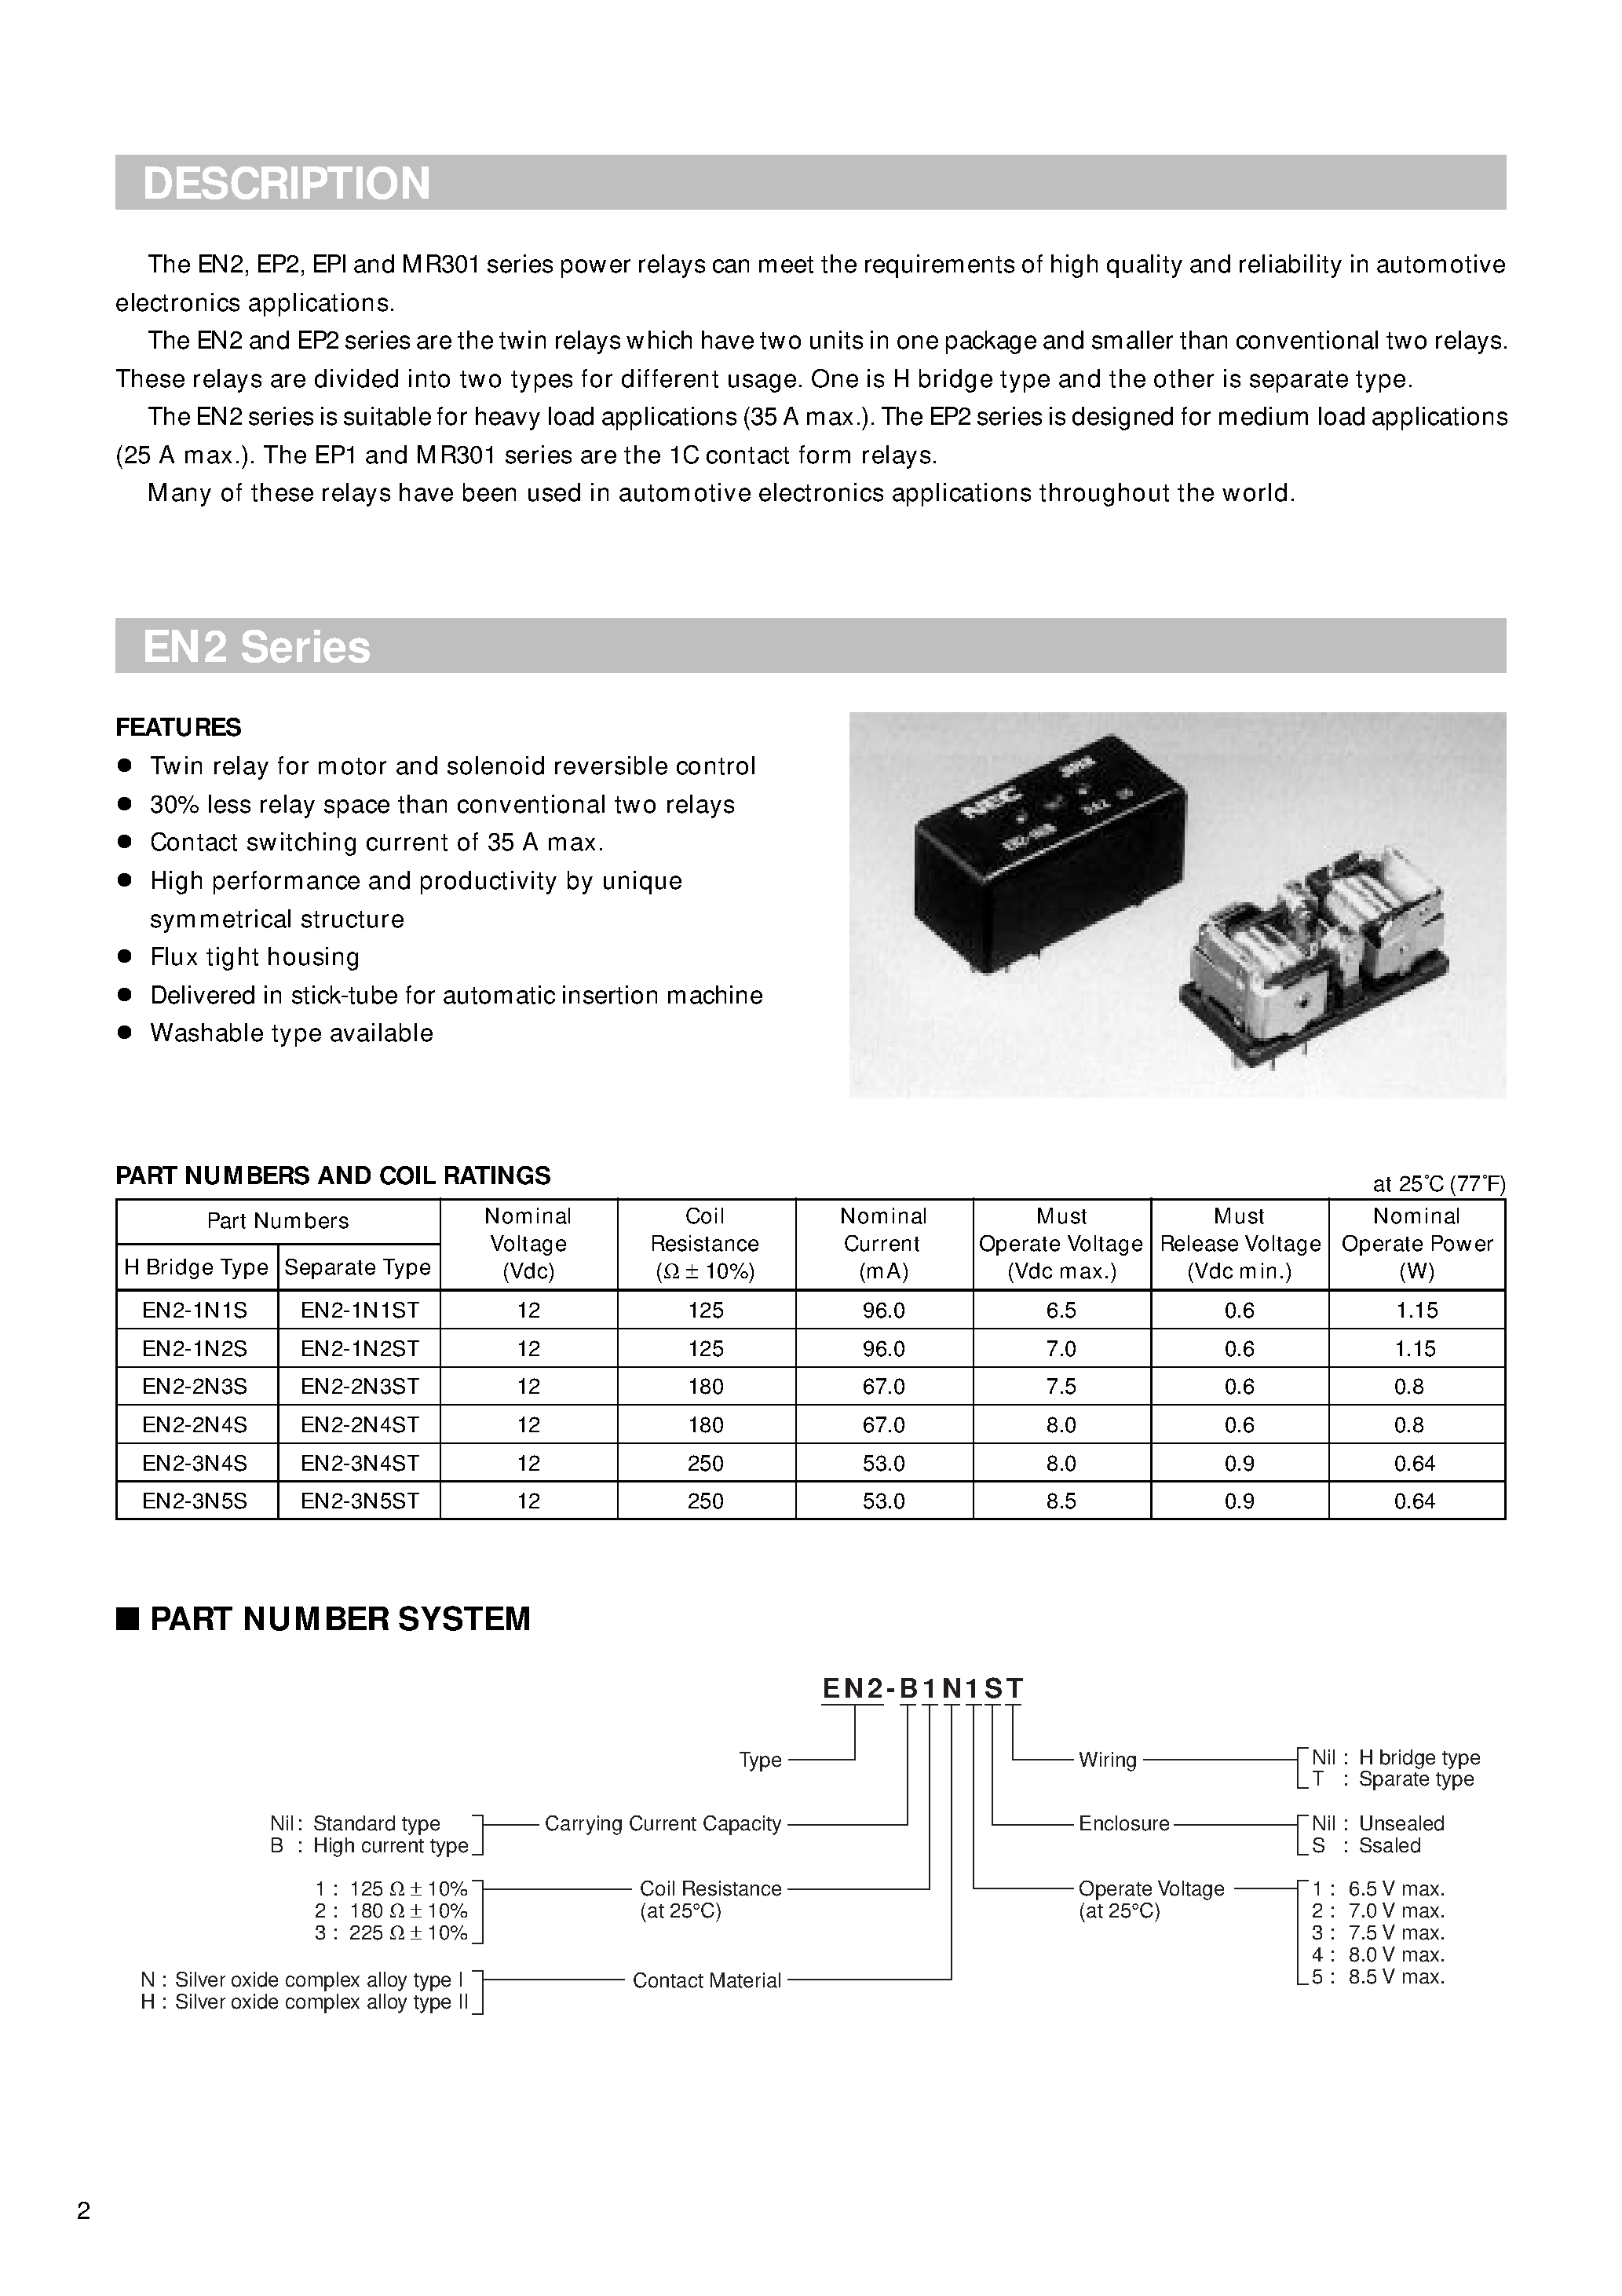 Datasheet EN2-1N5S - Twin relay for motor and solenoid reversible control page 2